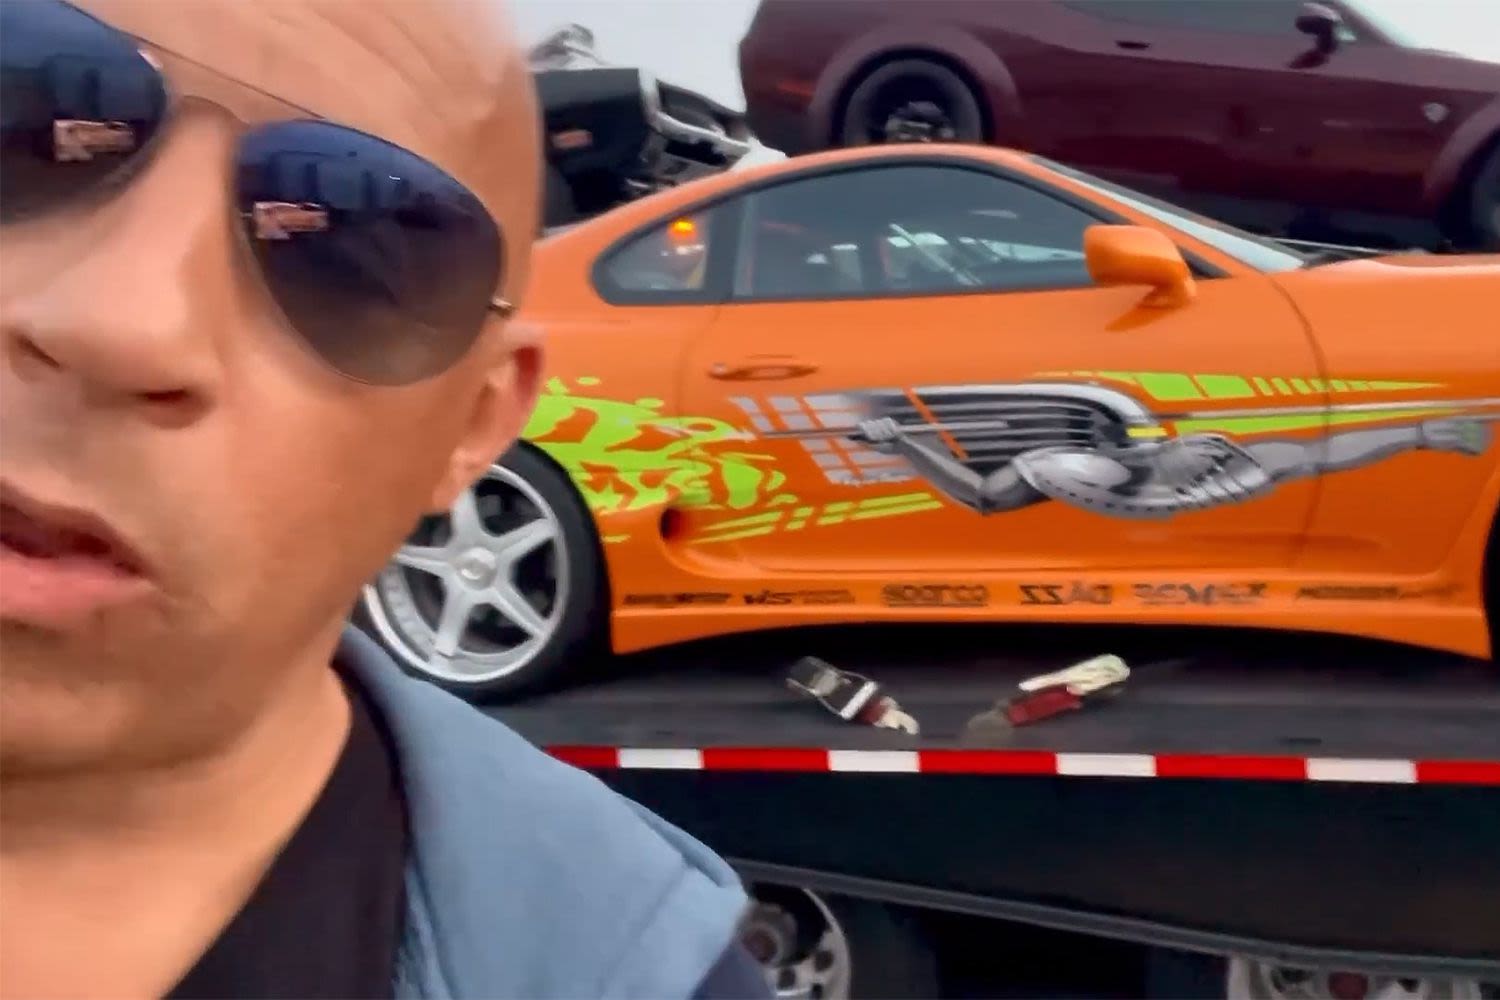 Vin Diesel Reunites with Paul Walker's Toyota Supra from 2001's “The Fast and the Furious”: 'Holds a Special Place in My Heart'